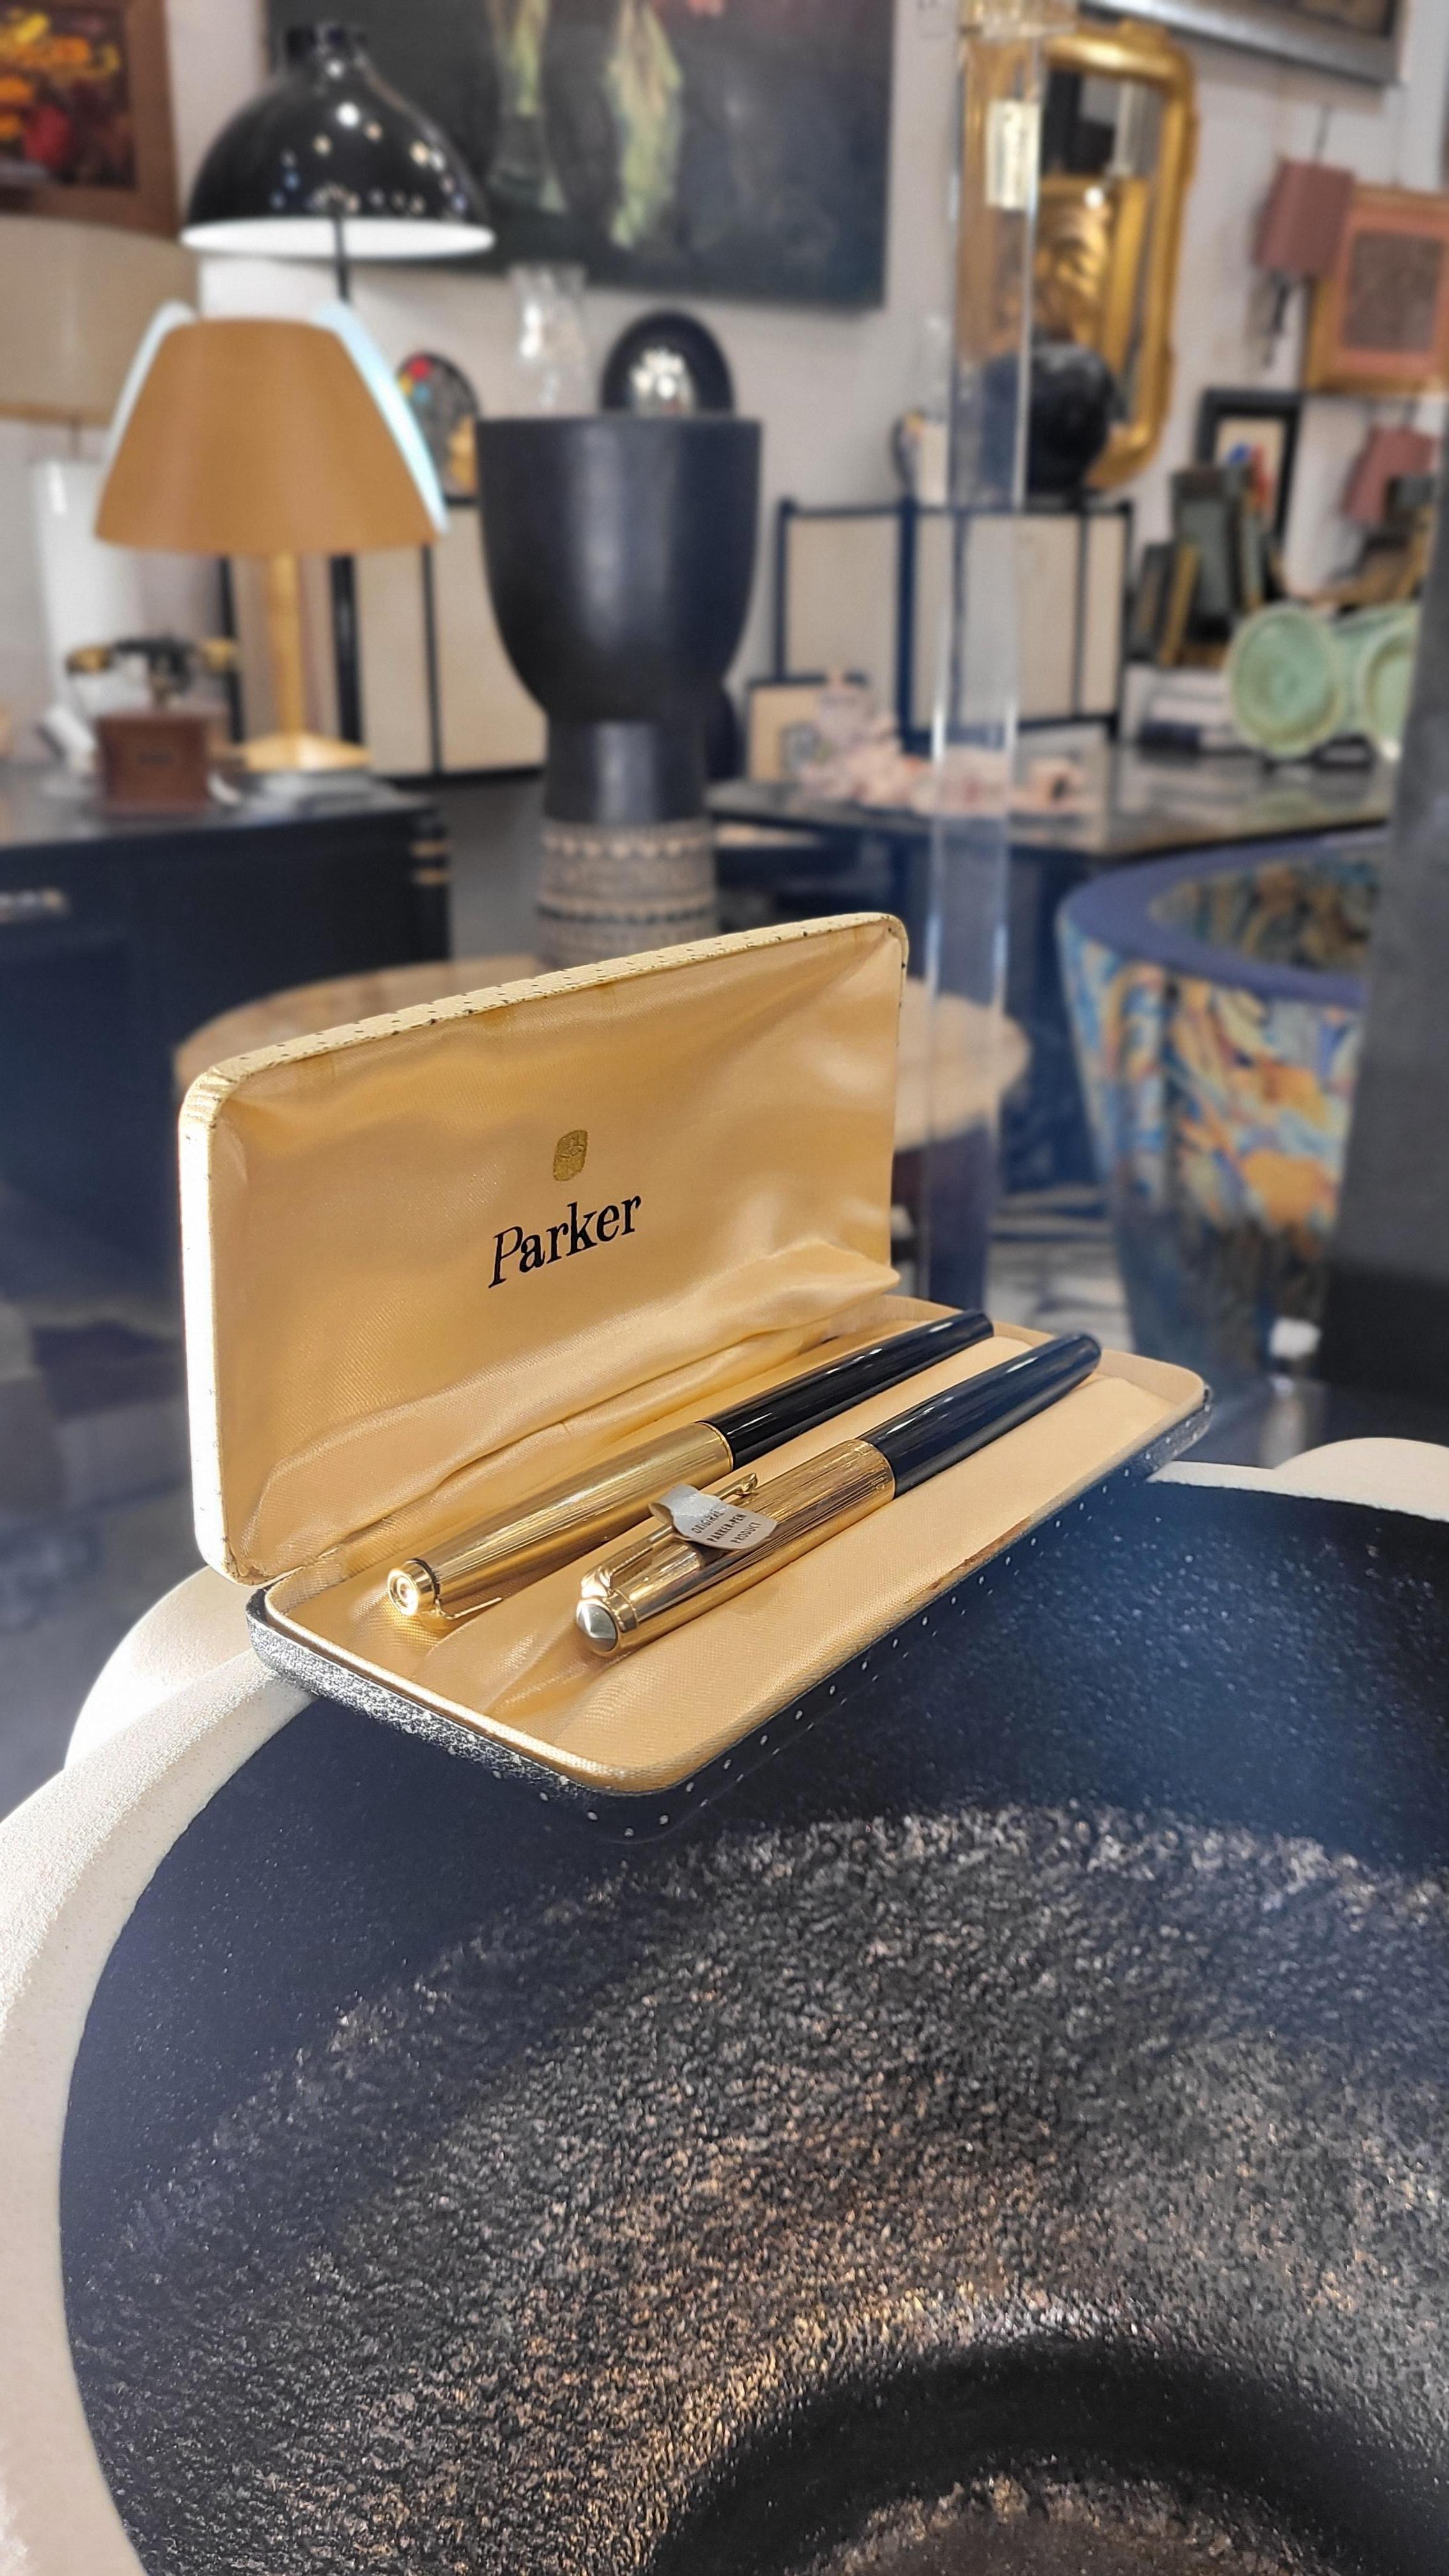 70s Parker fountain pen set, gold plated, case
Fountain pen manufactured in the United States by Parker in the mid-sixties.
Pair of PARKER 45 CUSTOM fountain pens. Gold plated and black plastic. 14 Kt nib. Converter. 1965. USA.
In its original box.